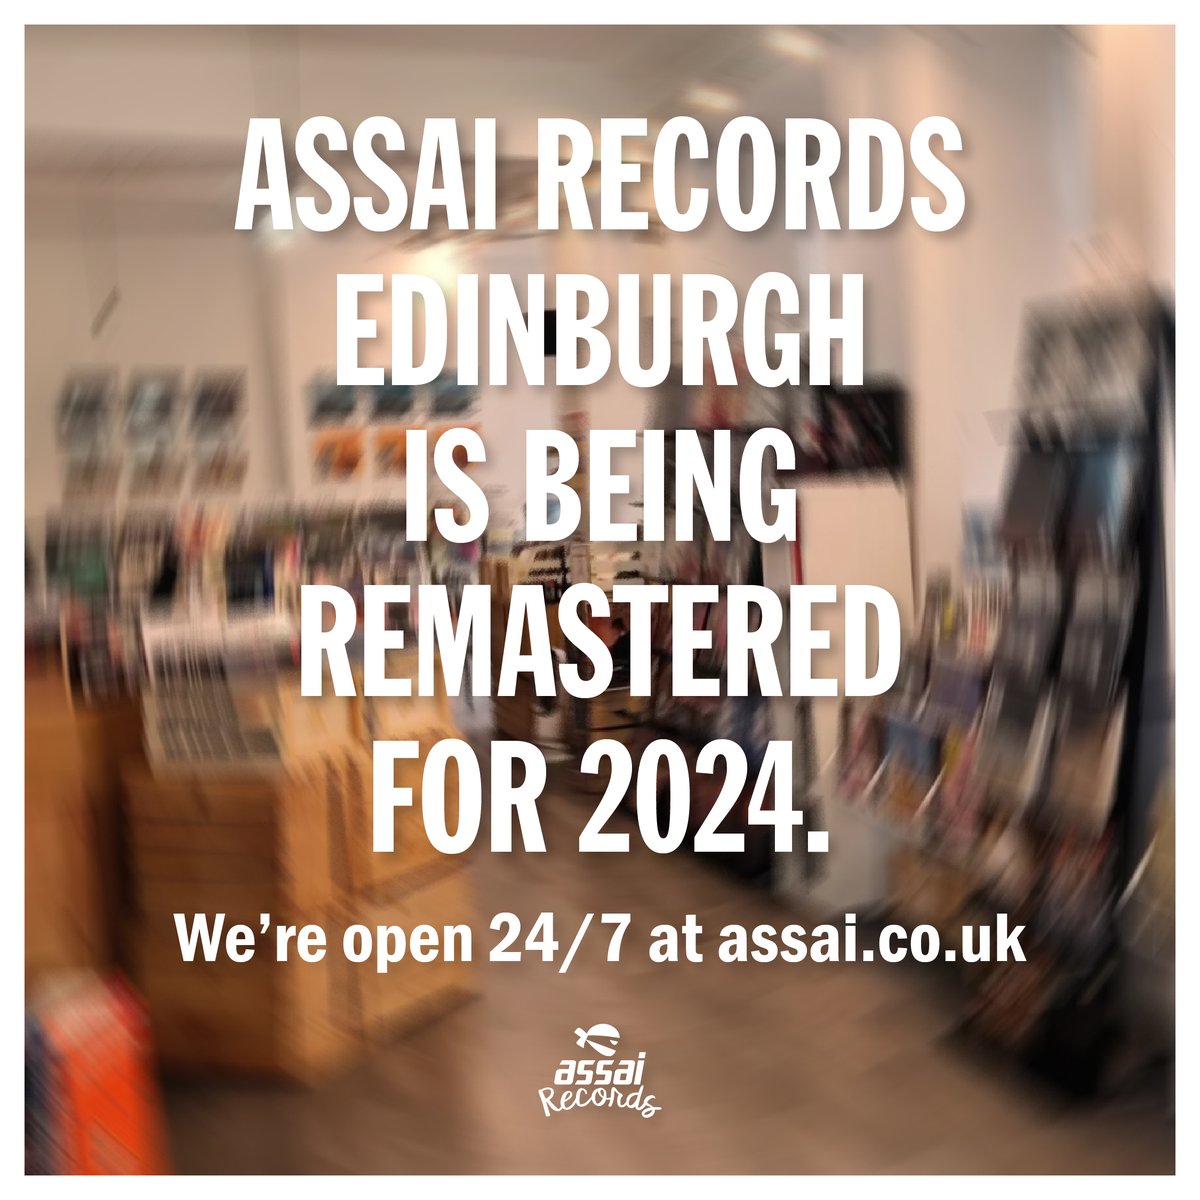 Exciting news! We're bringing you a bigger and better Assai Edinburgh! Refurbishment begins on Sunday 25th February and we hope to be back with you as of Saturday 16th March. Keep your eyes peeled for updates! #assai #edinburgh #vinyl #refurb